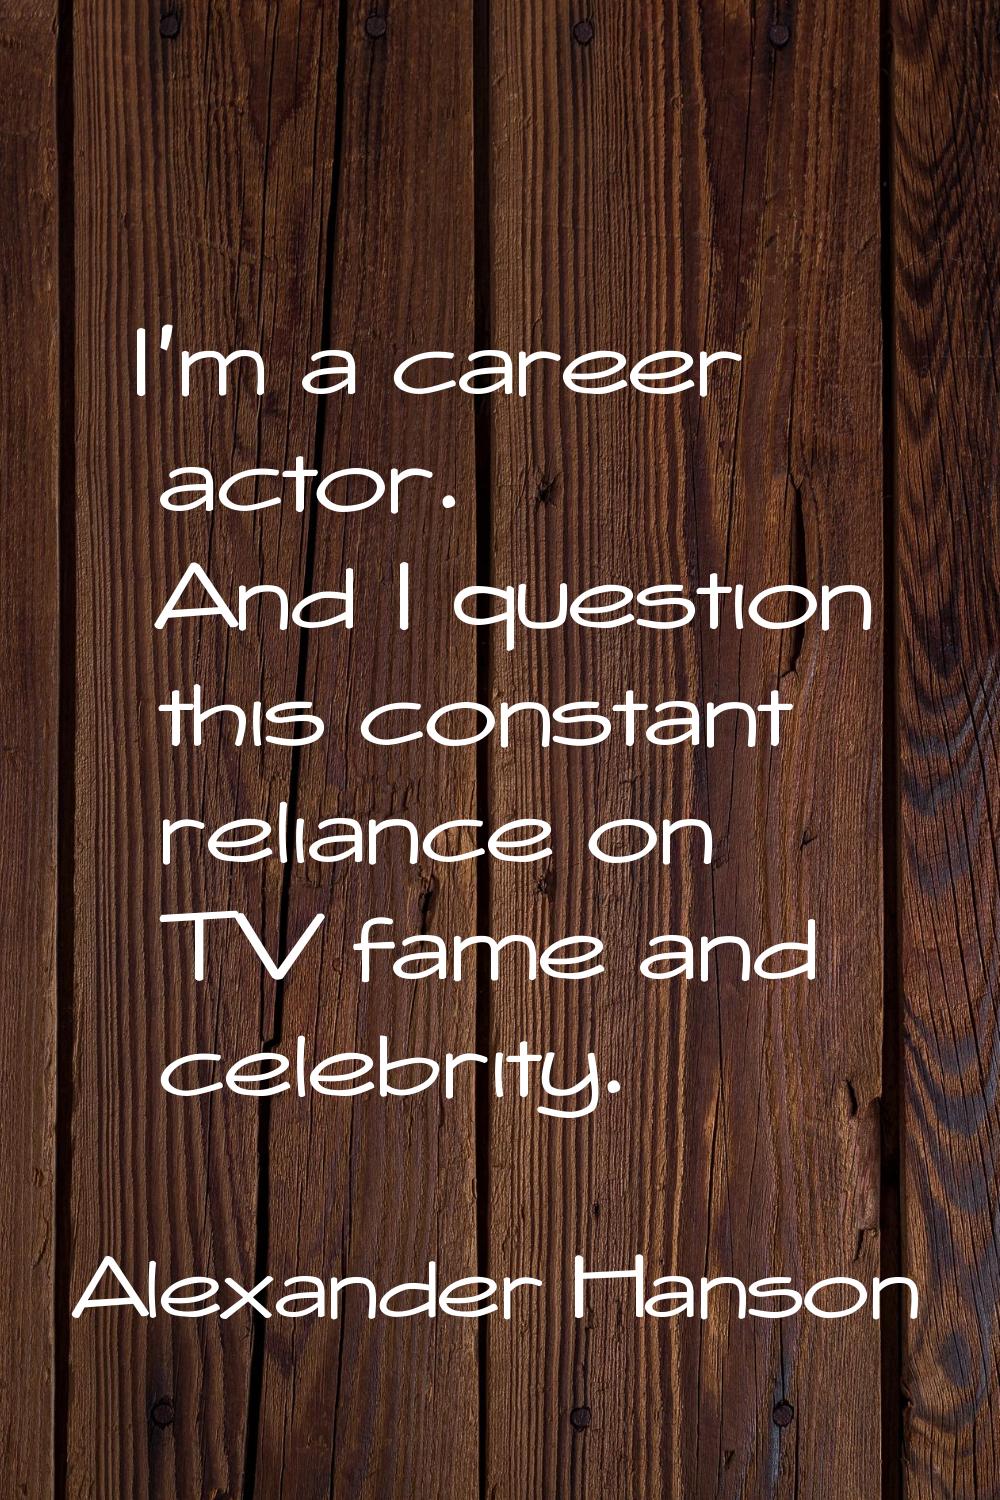 I'm a career actor. And I question this constant reliance on TV fame and celebrity.